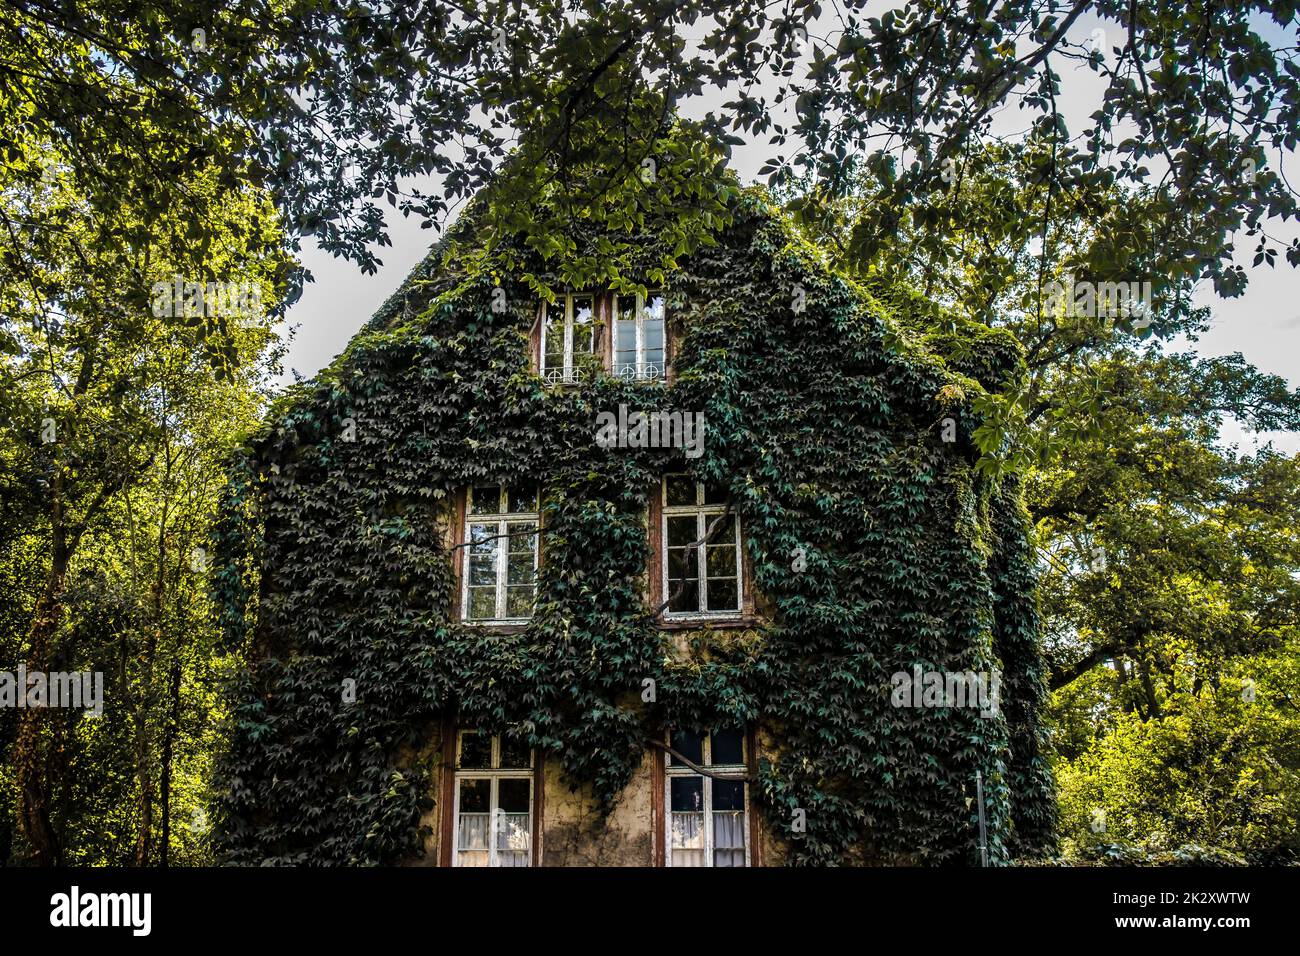 House overgrown with ivy on a facade with windows on a summer day Stock Photo